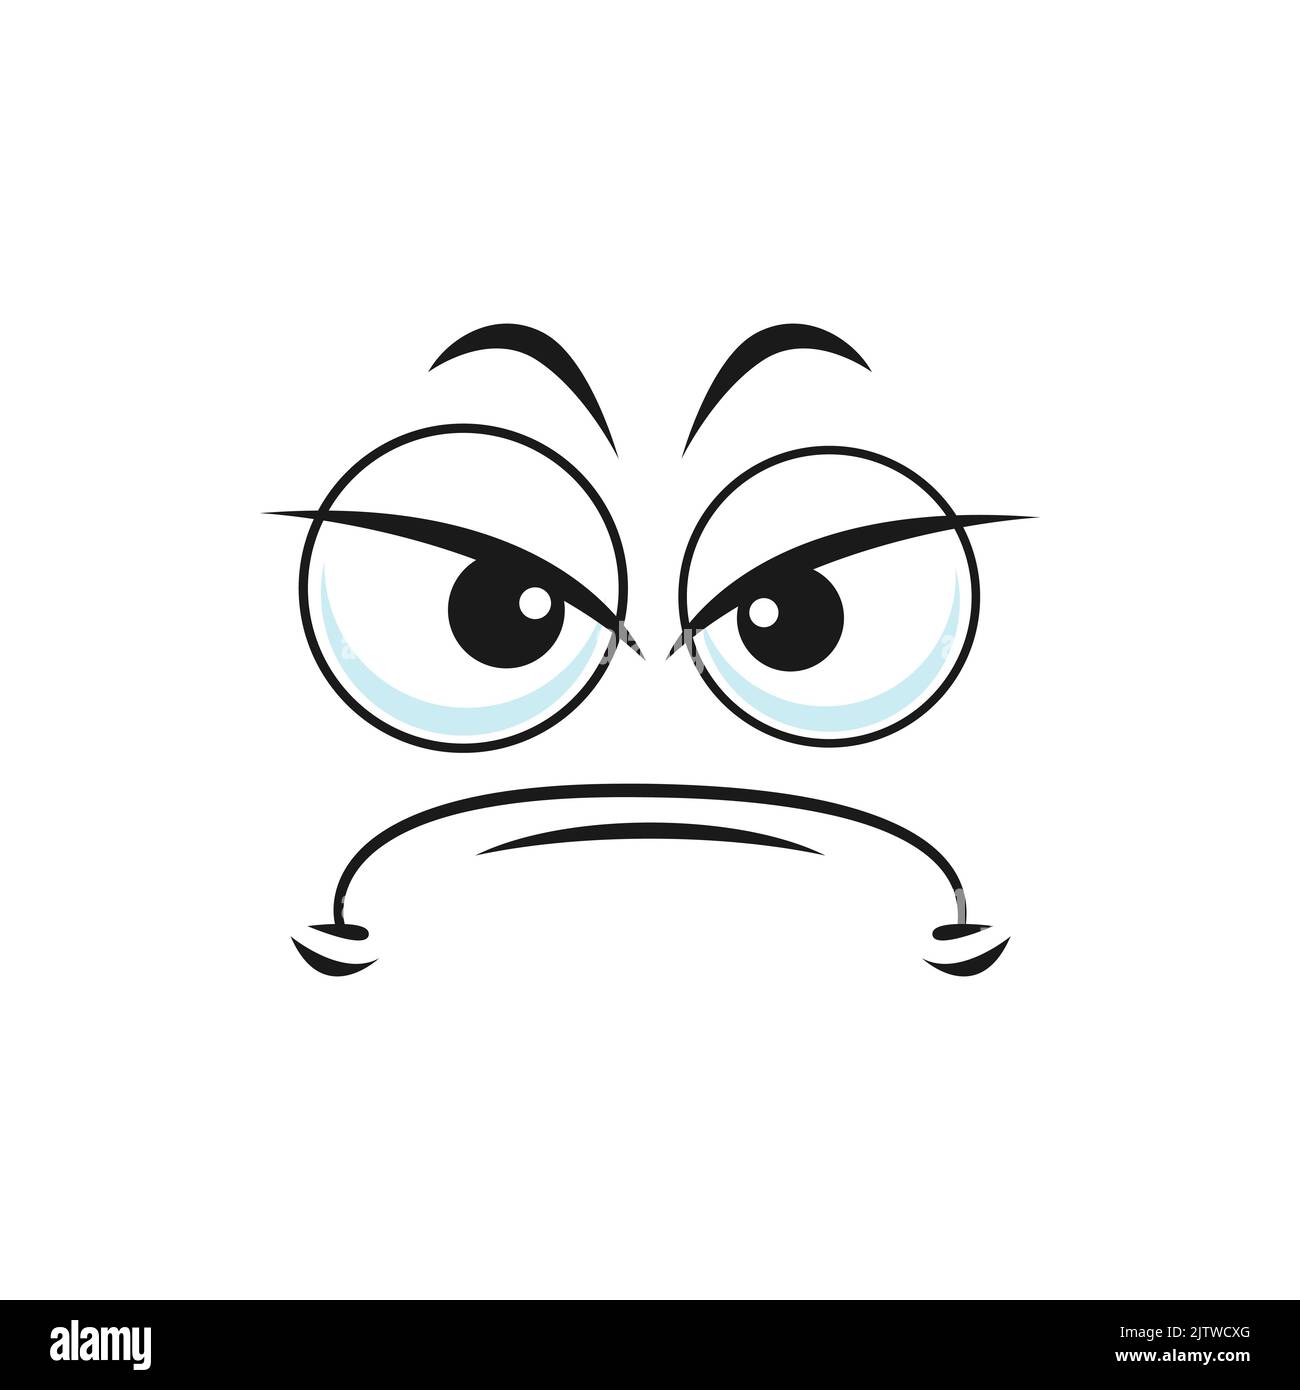 Cartoon face negative expression, vector displeased emoji with squinted eyes look sullenly and closed mouth with corners curved down. Sullen facial em Stock Vector